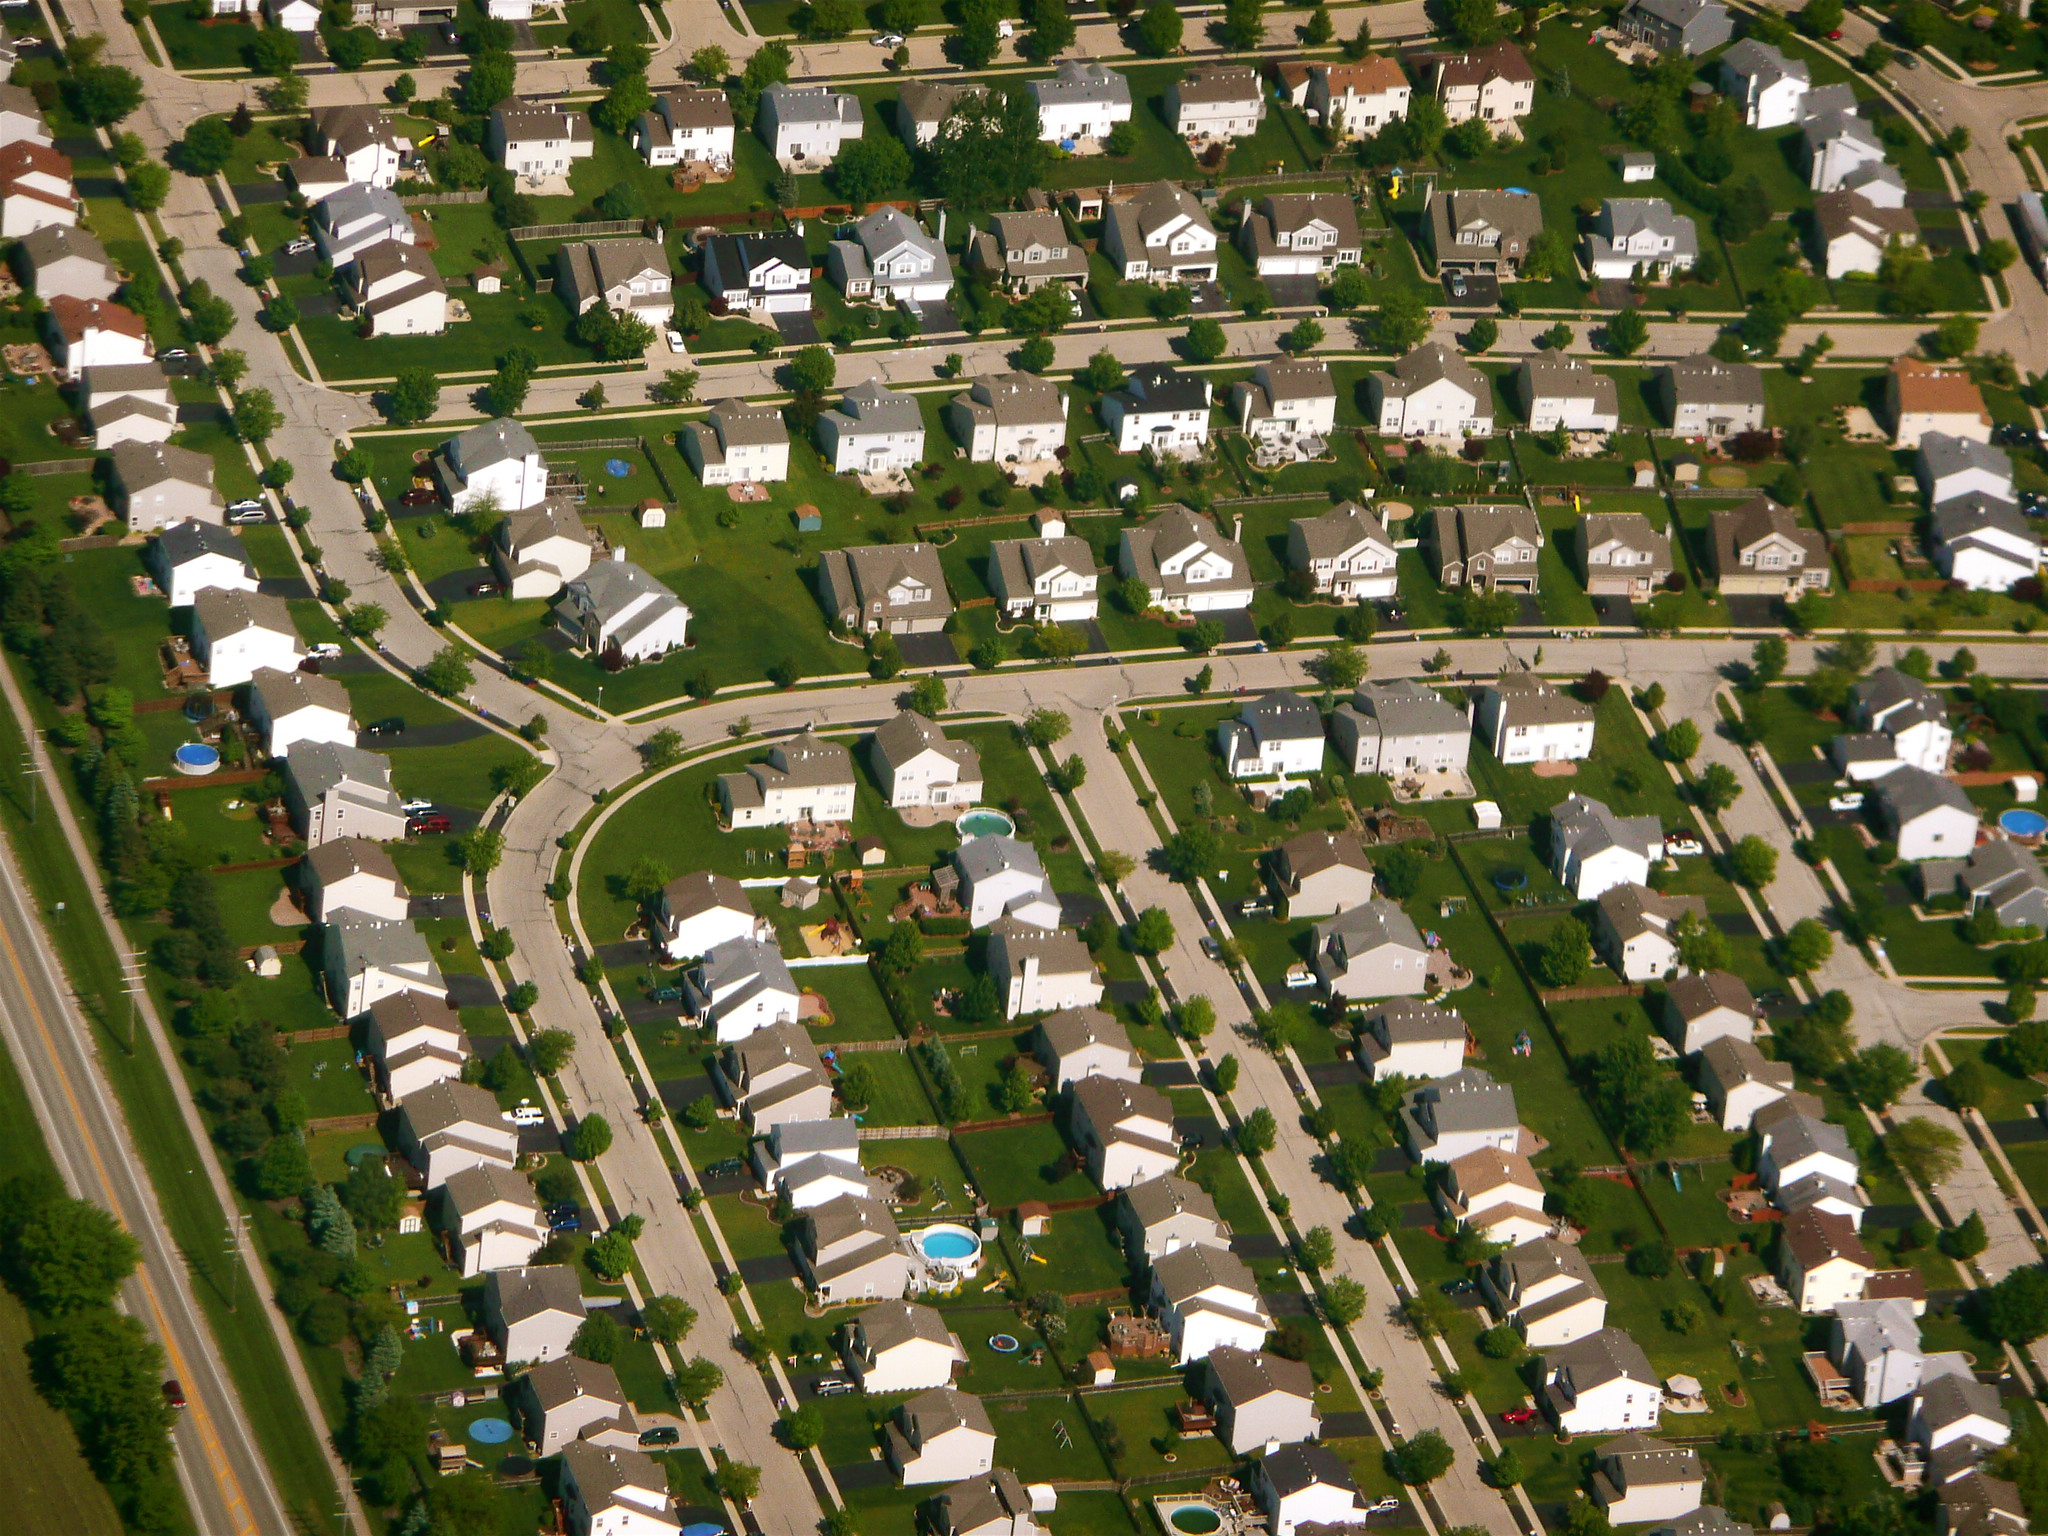 Consider the contrast between Jacobs diverse cities and the homogenous suburbs which became popular in post WWII America. Image is titled 'Chicago suburbs from the air' by Scorpions and Centaurs, CC BY-NC-SA 2.0.